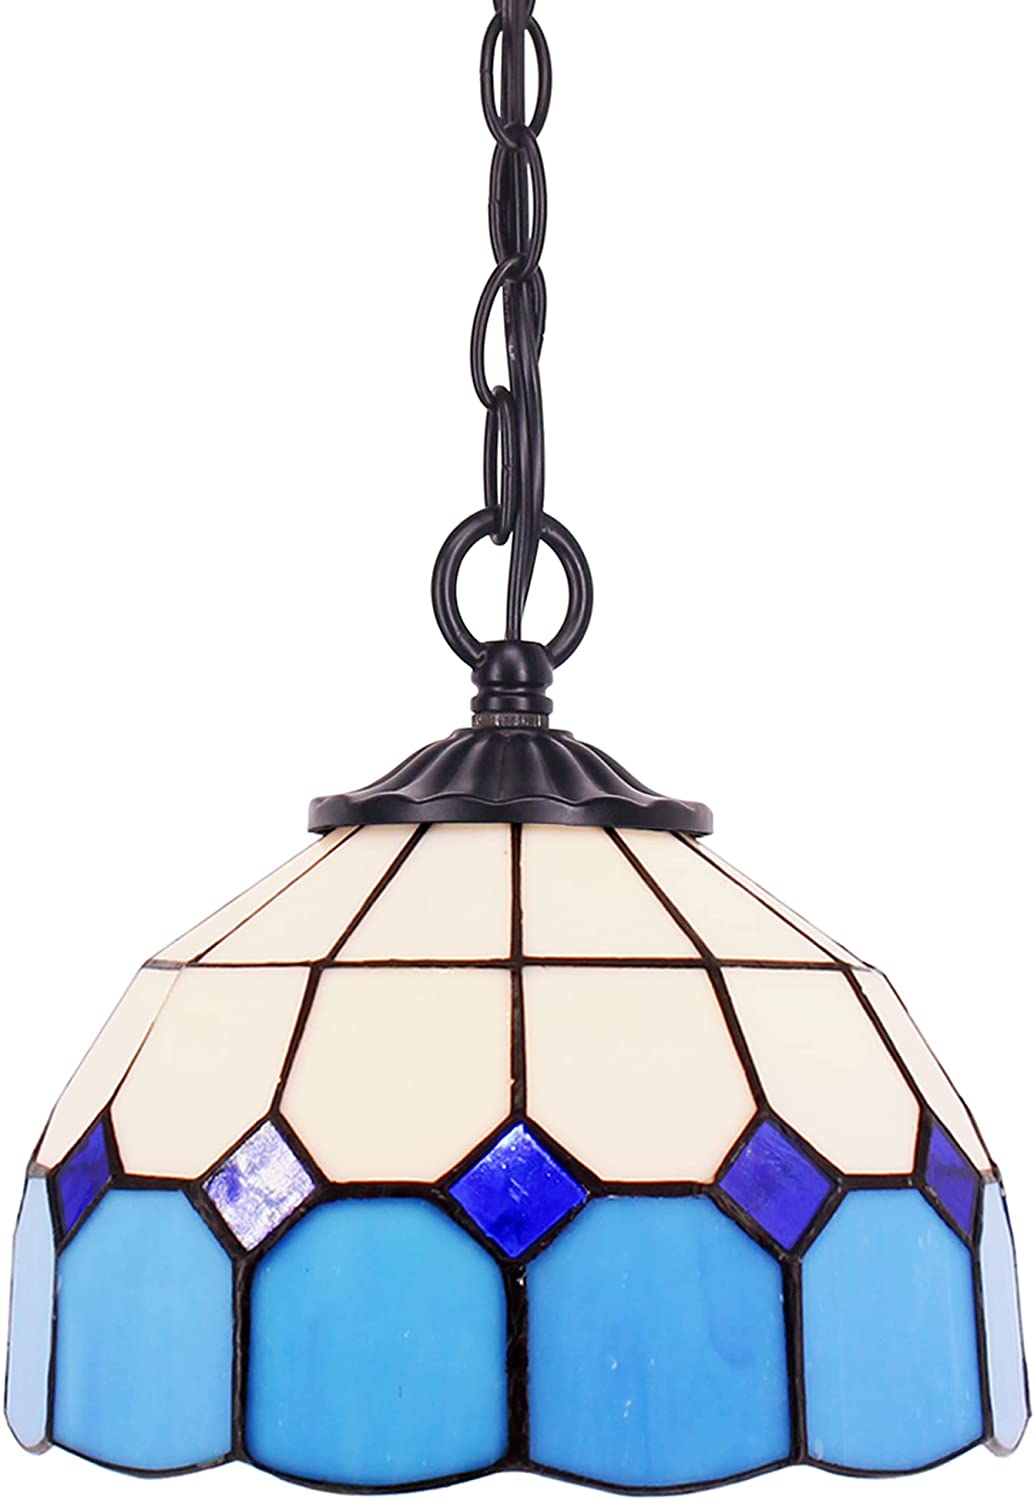 Tiffany Pendant Light with 8 Inch Blue Stained Glass Style Shade Hanging Lamp